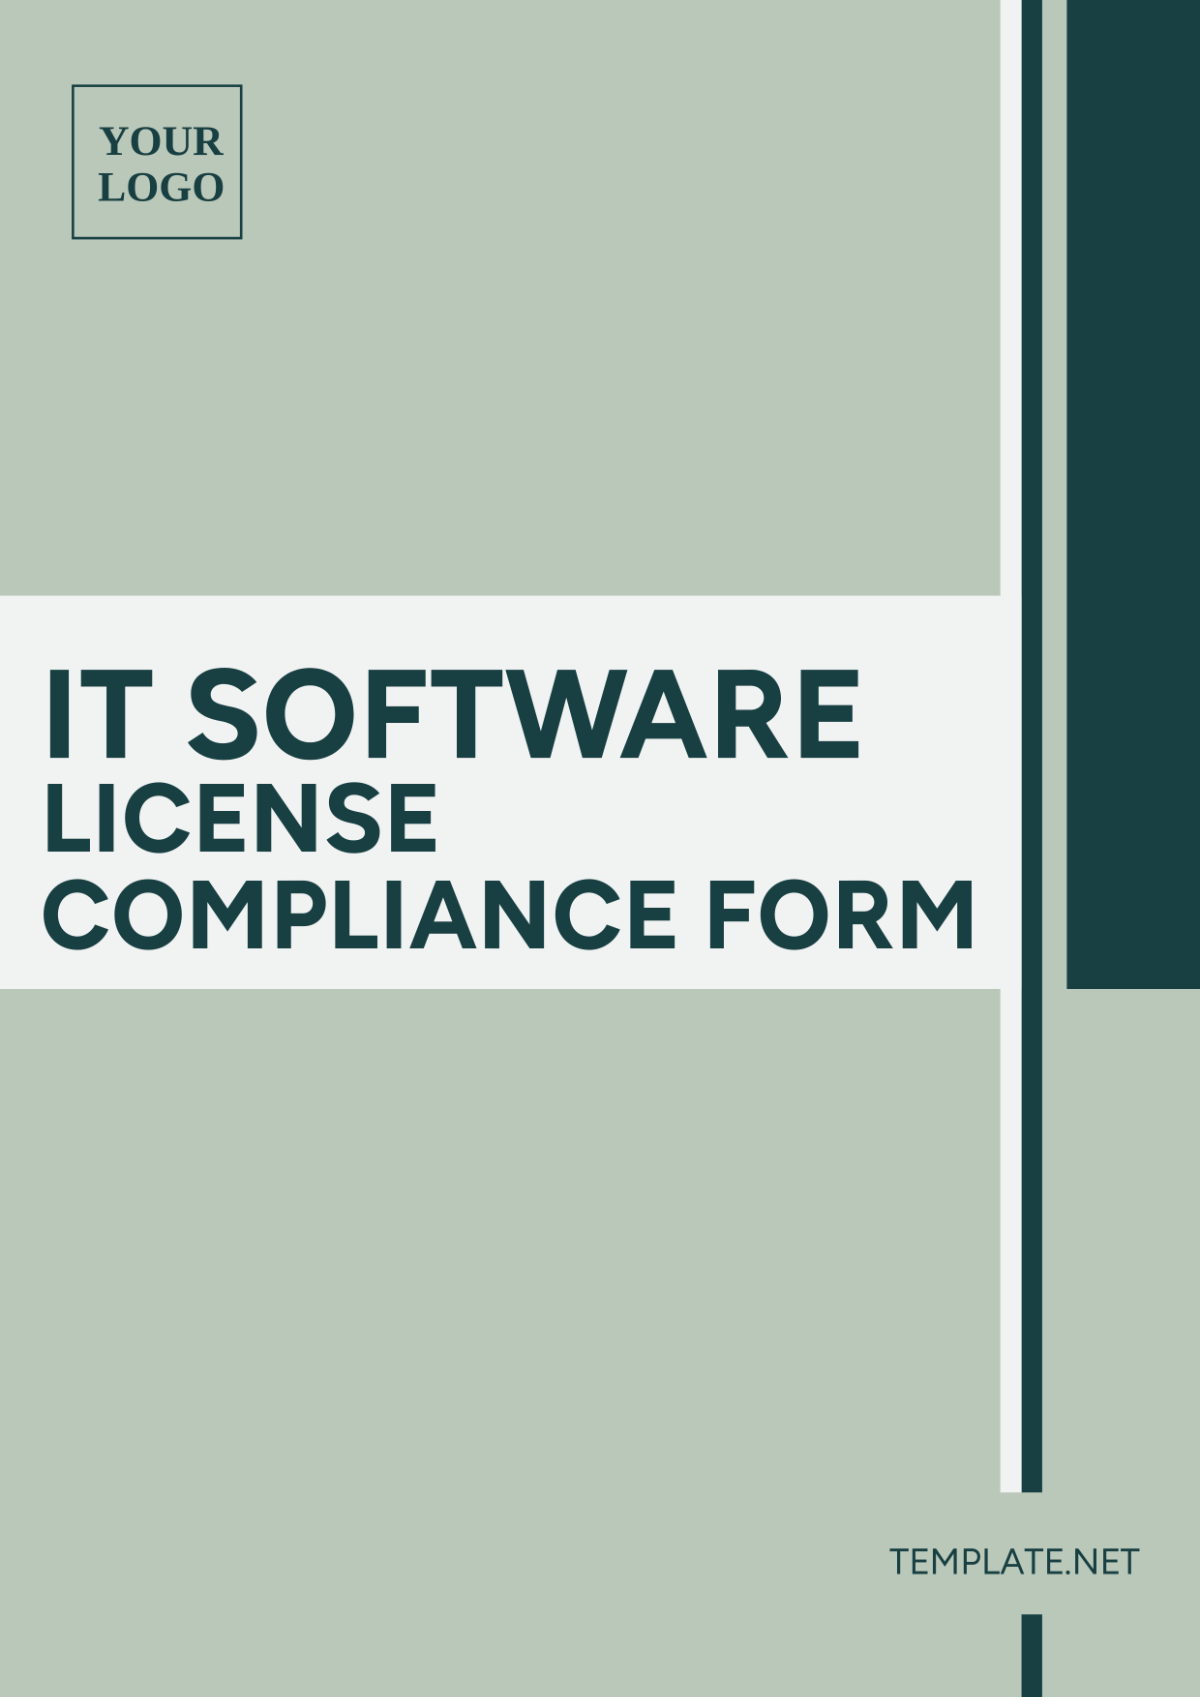 IT Software License Compliance Form Template